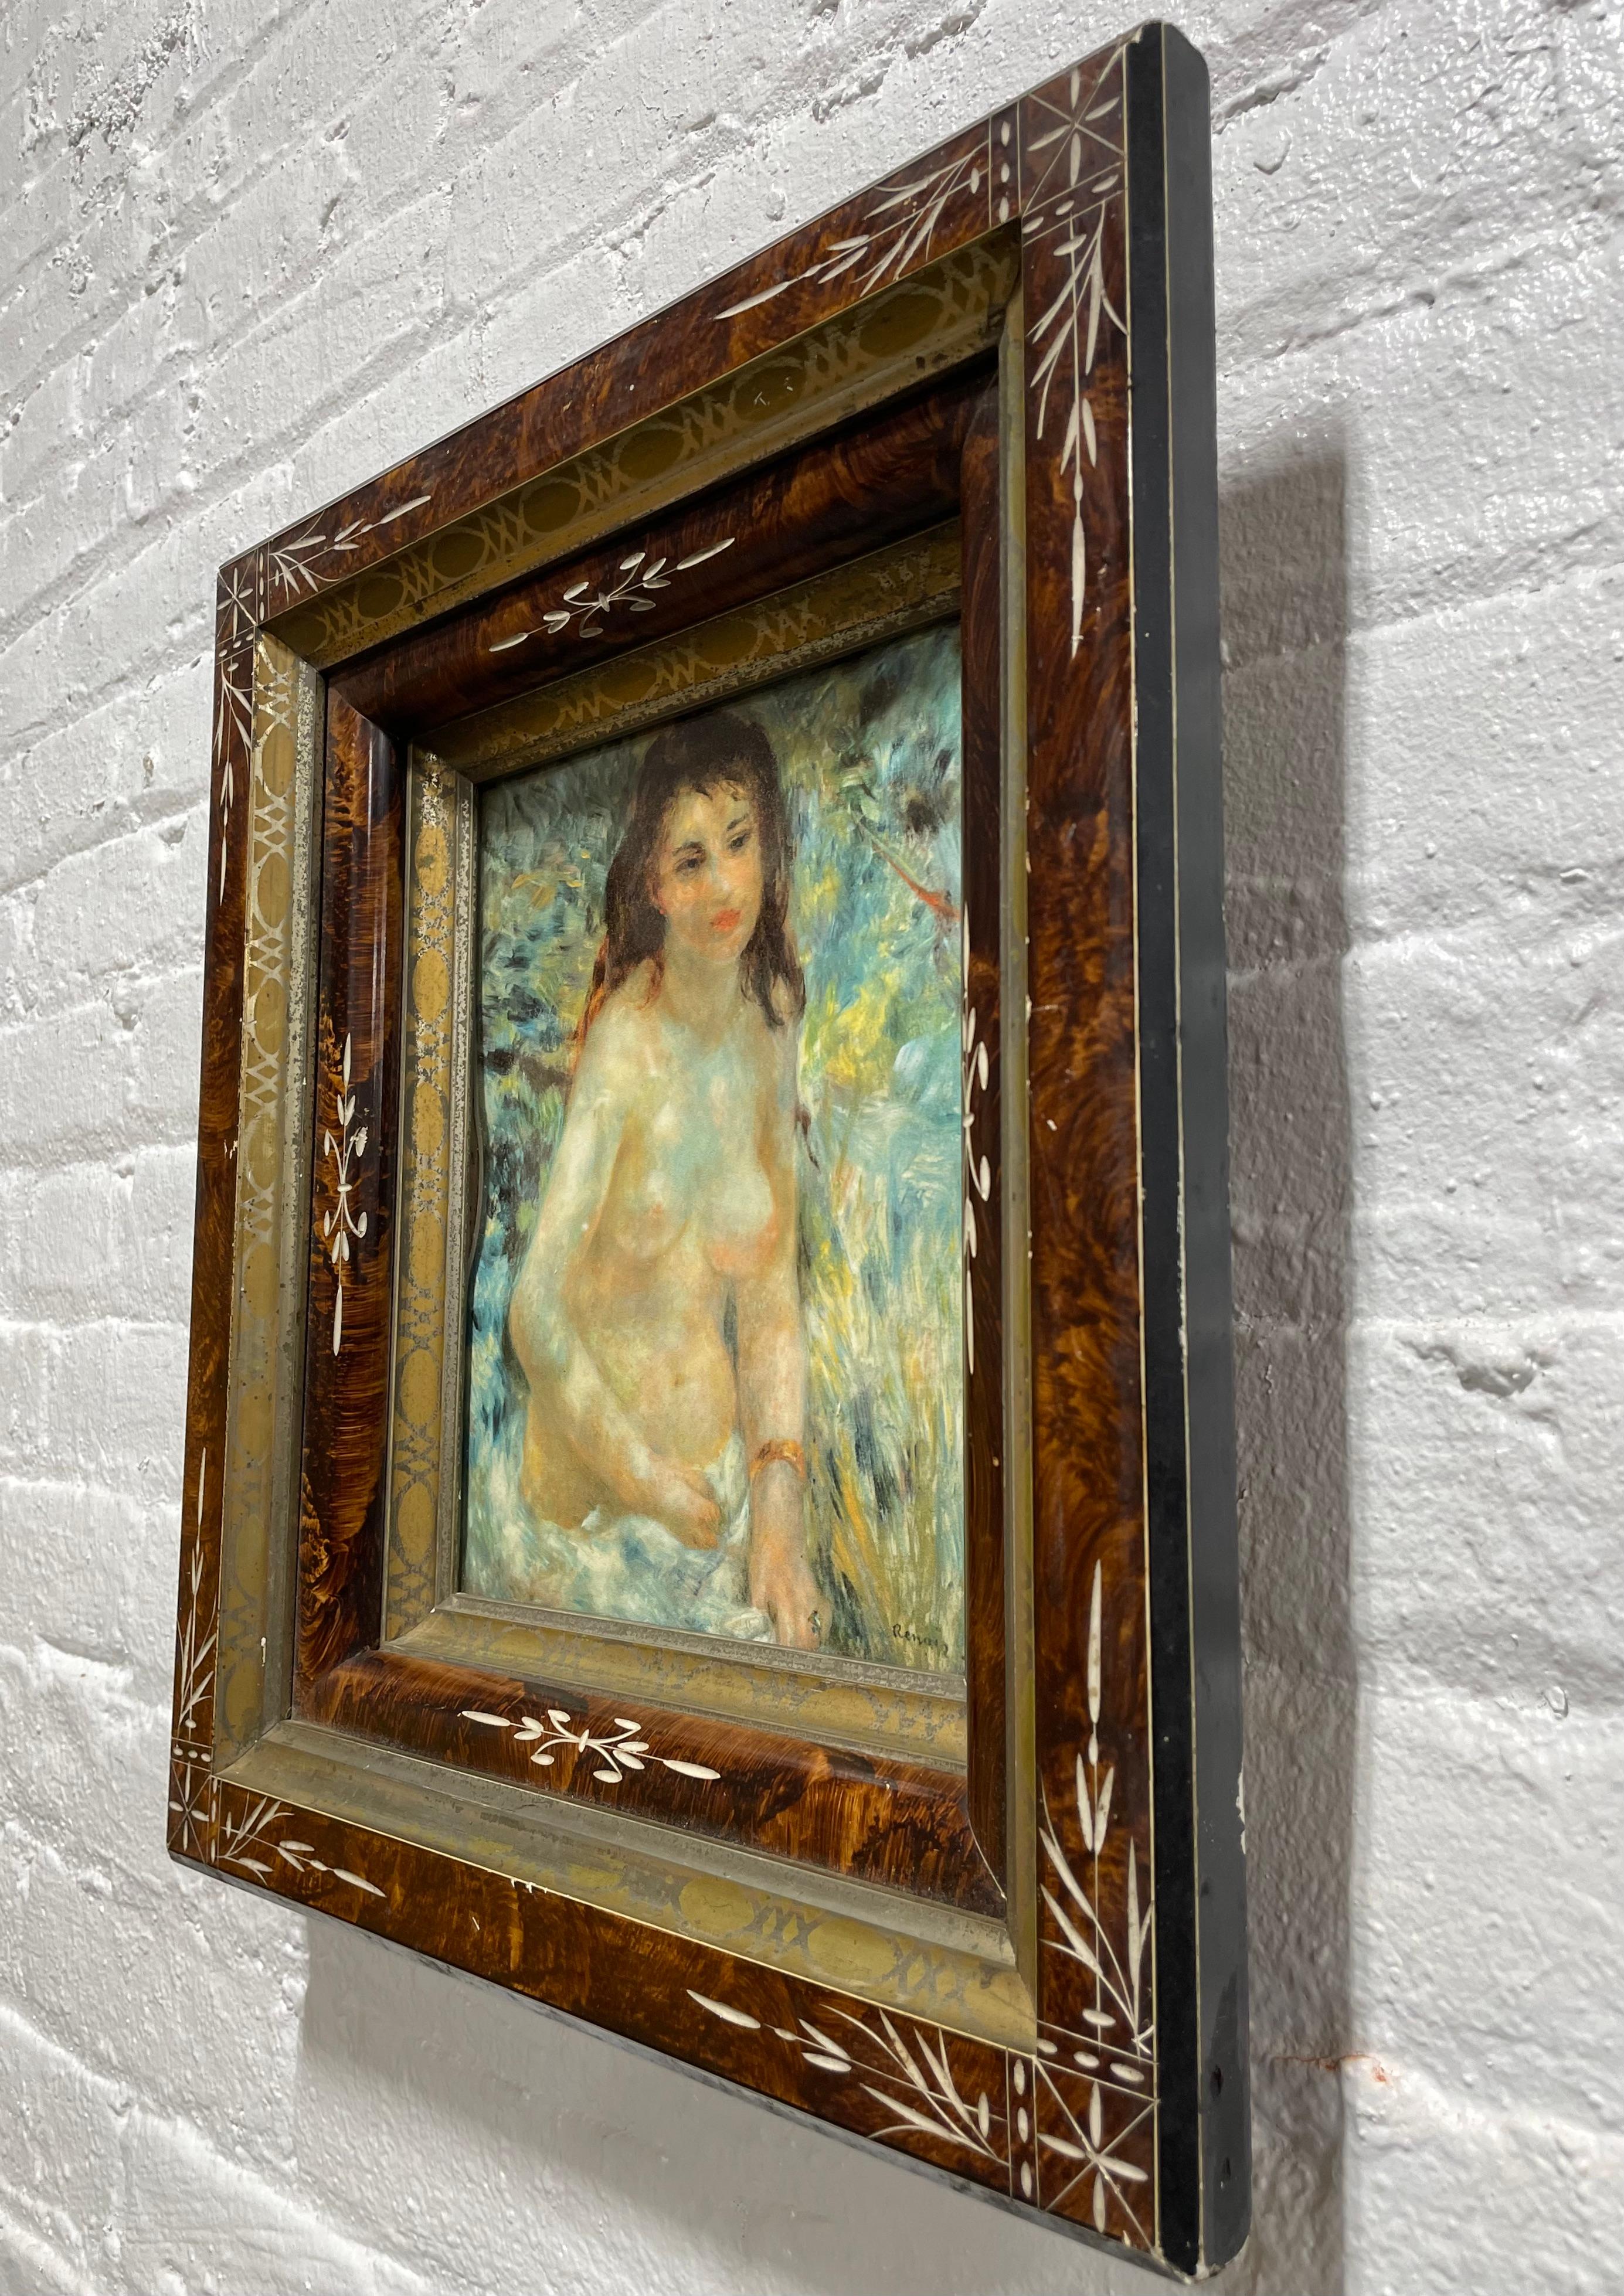 FRAMED Female Nude Vintage Renoir Reproduction Artwork Wall Hanging In Good Condition For Sale In Weehawken, NJ